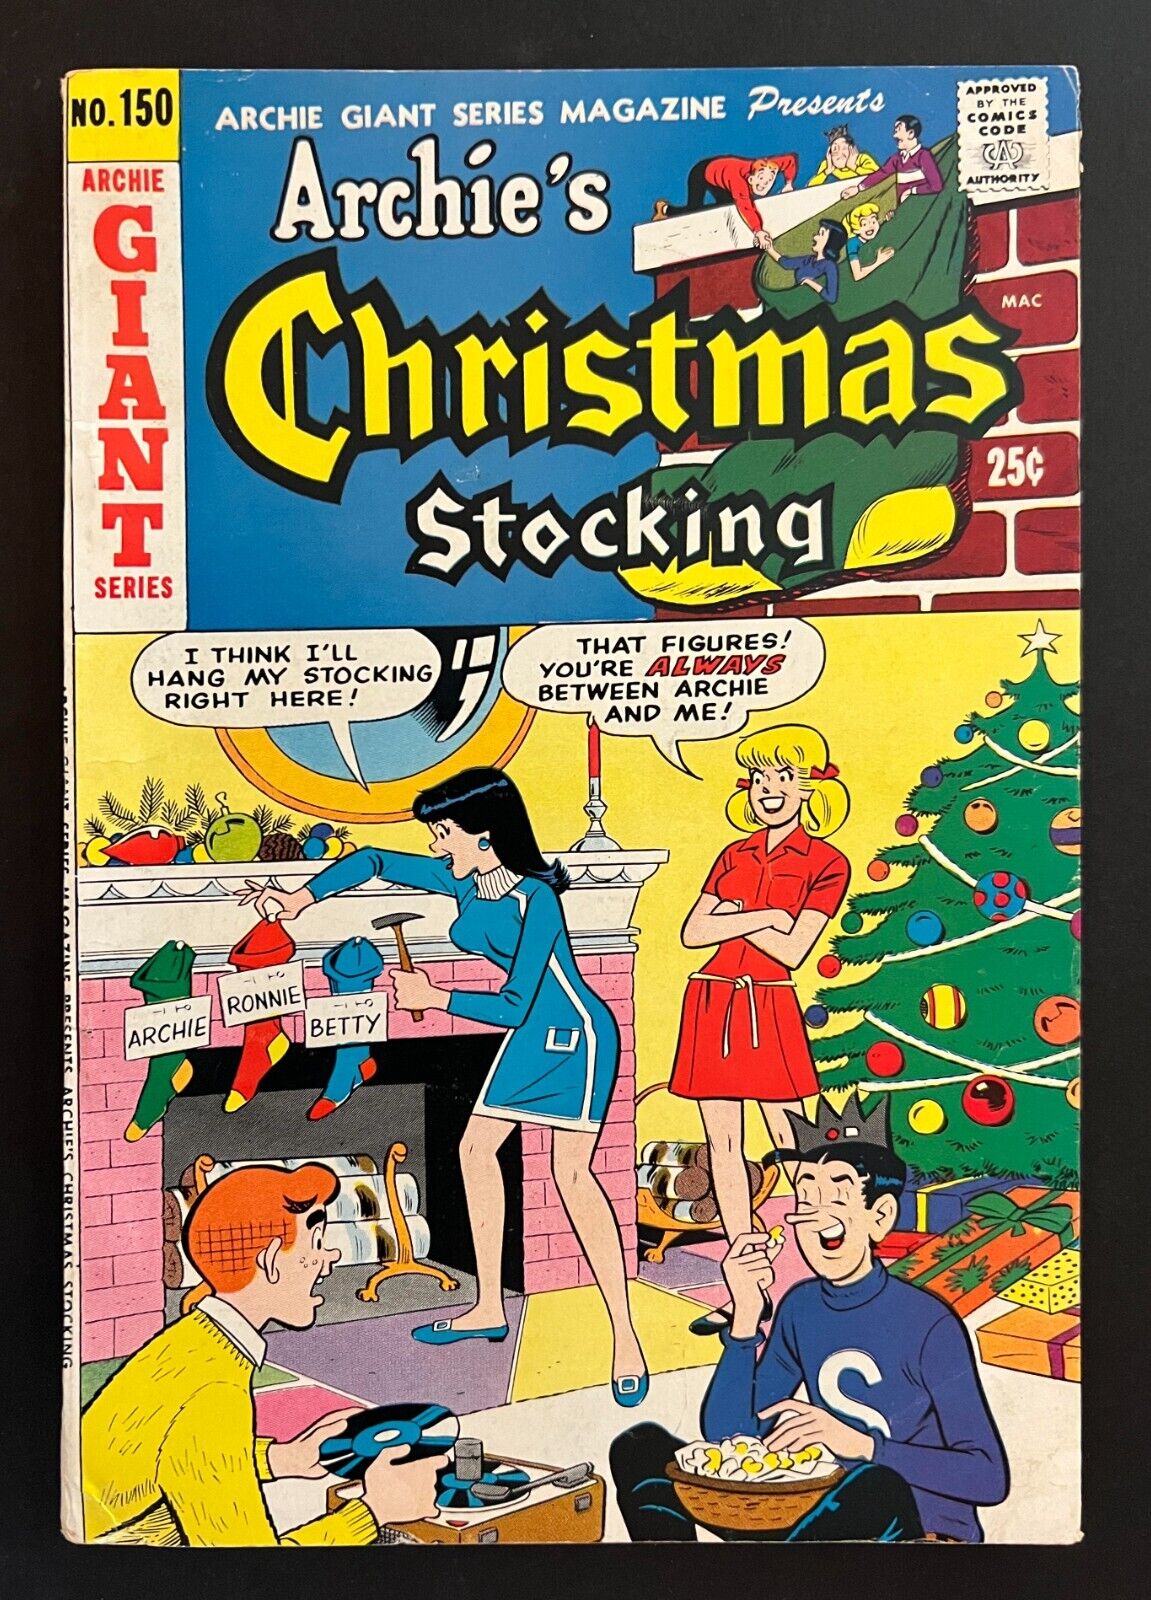 ARCHIE GIANT #150 Christmas Stocking Archie Comics 1968